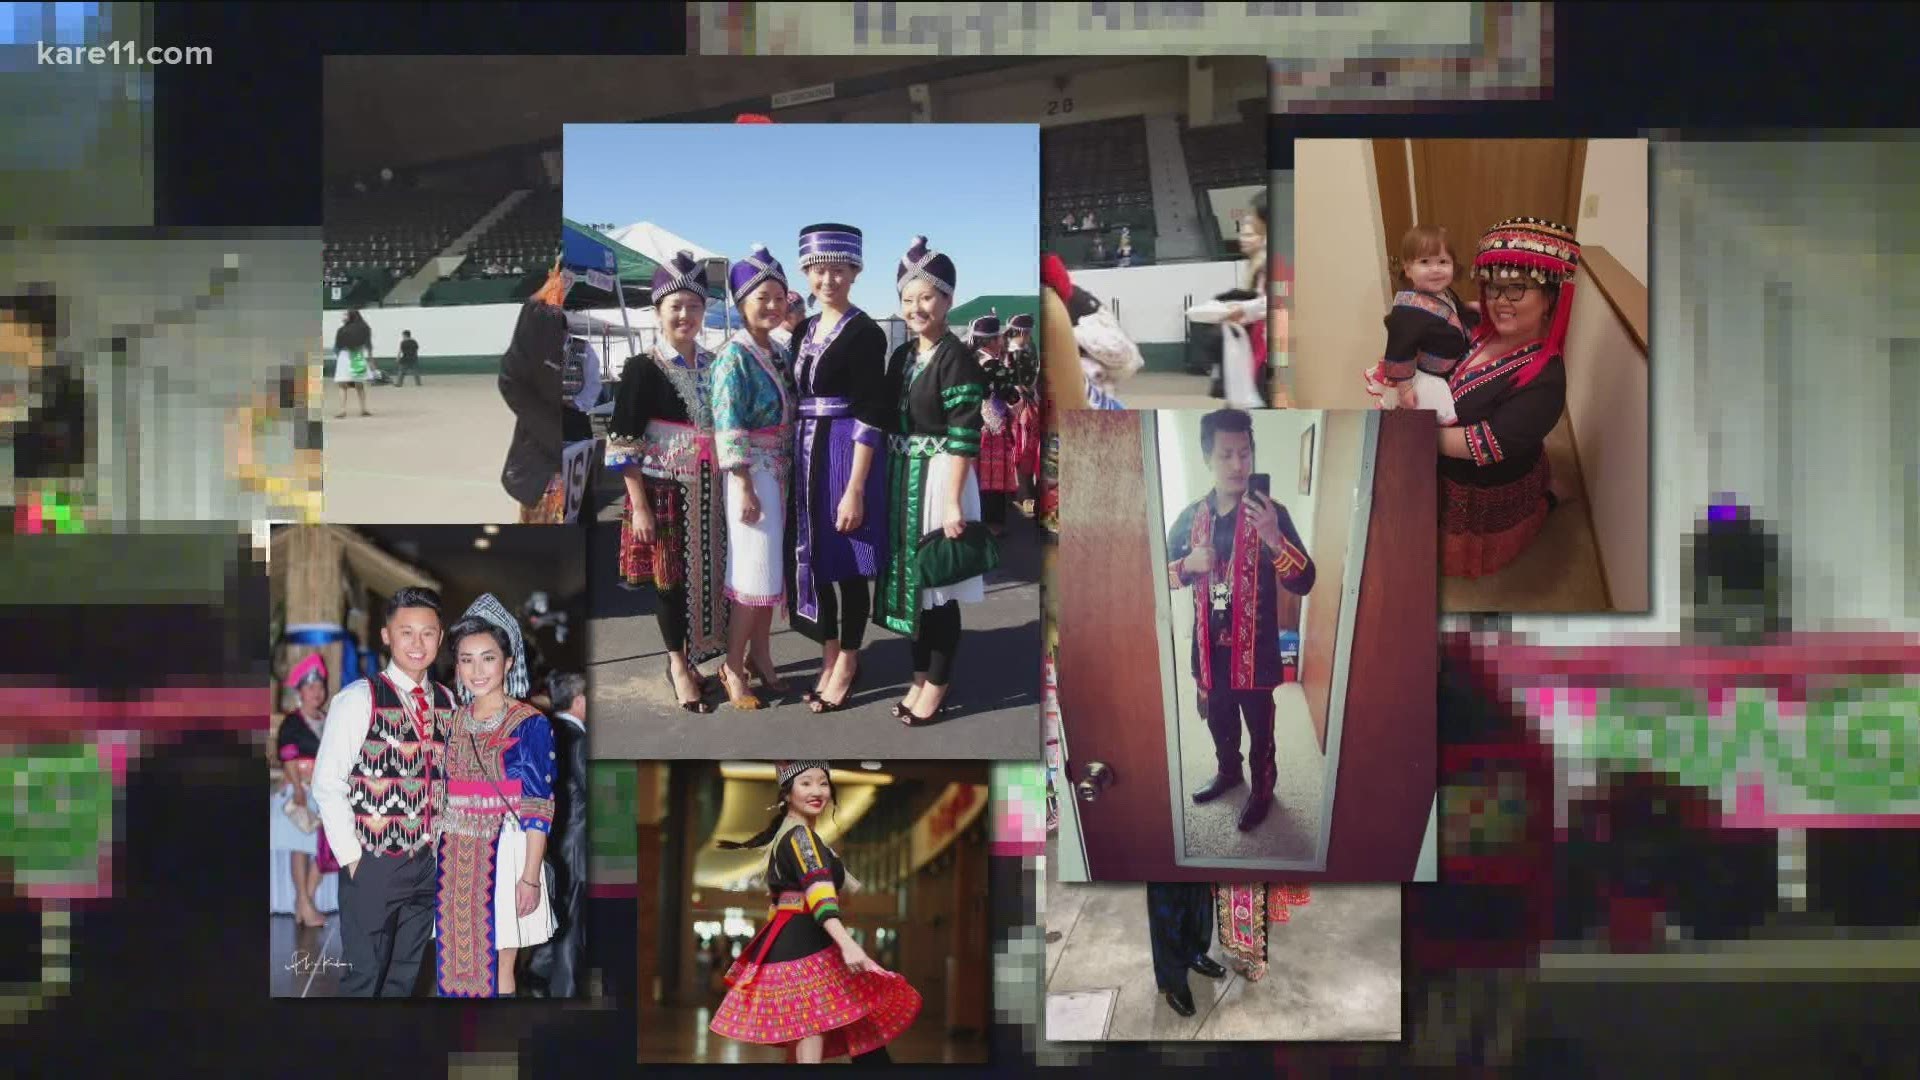 To wrap ourselves around the spirit of the Hmong New Year for the community in 2020, we asked for videos about why the Hmong New Year is important.